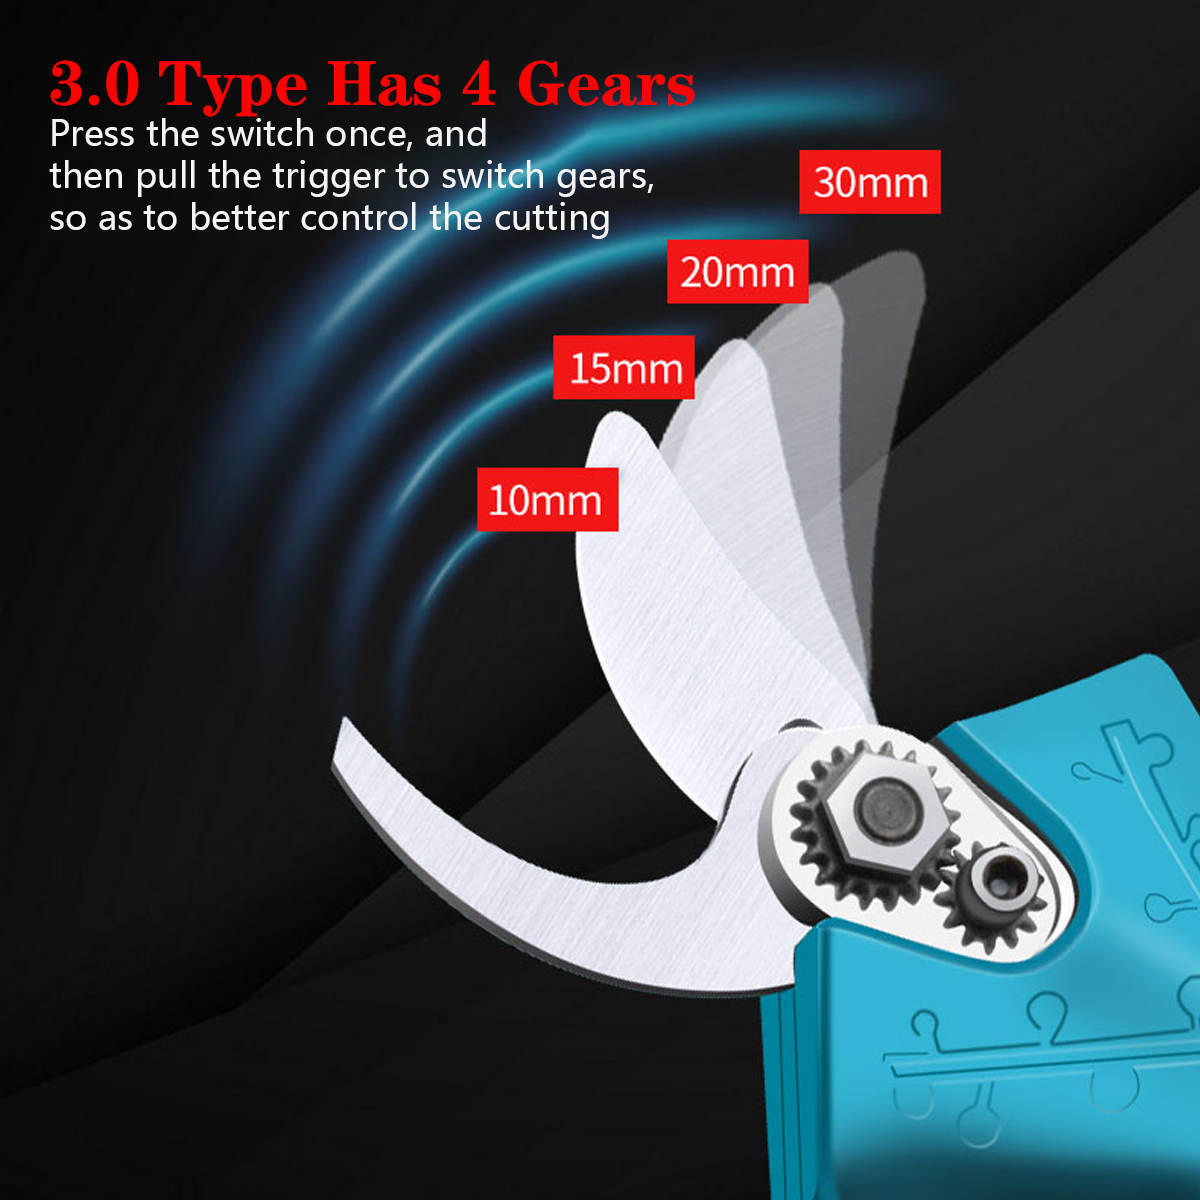 2530mm-Cordless-Electric-Branch-Scissors-Shear-Pruning-Cutter-Tool-Trimmer-For-WorxMakita-18V-21V-Ba-1816478-7